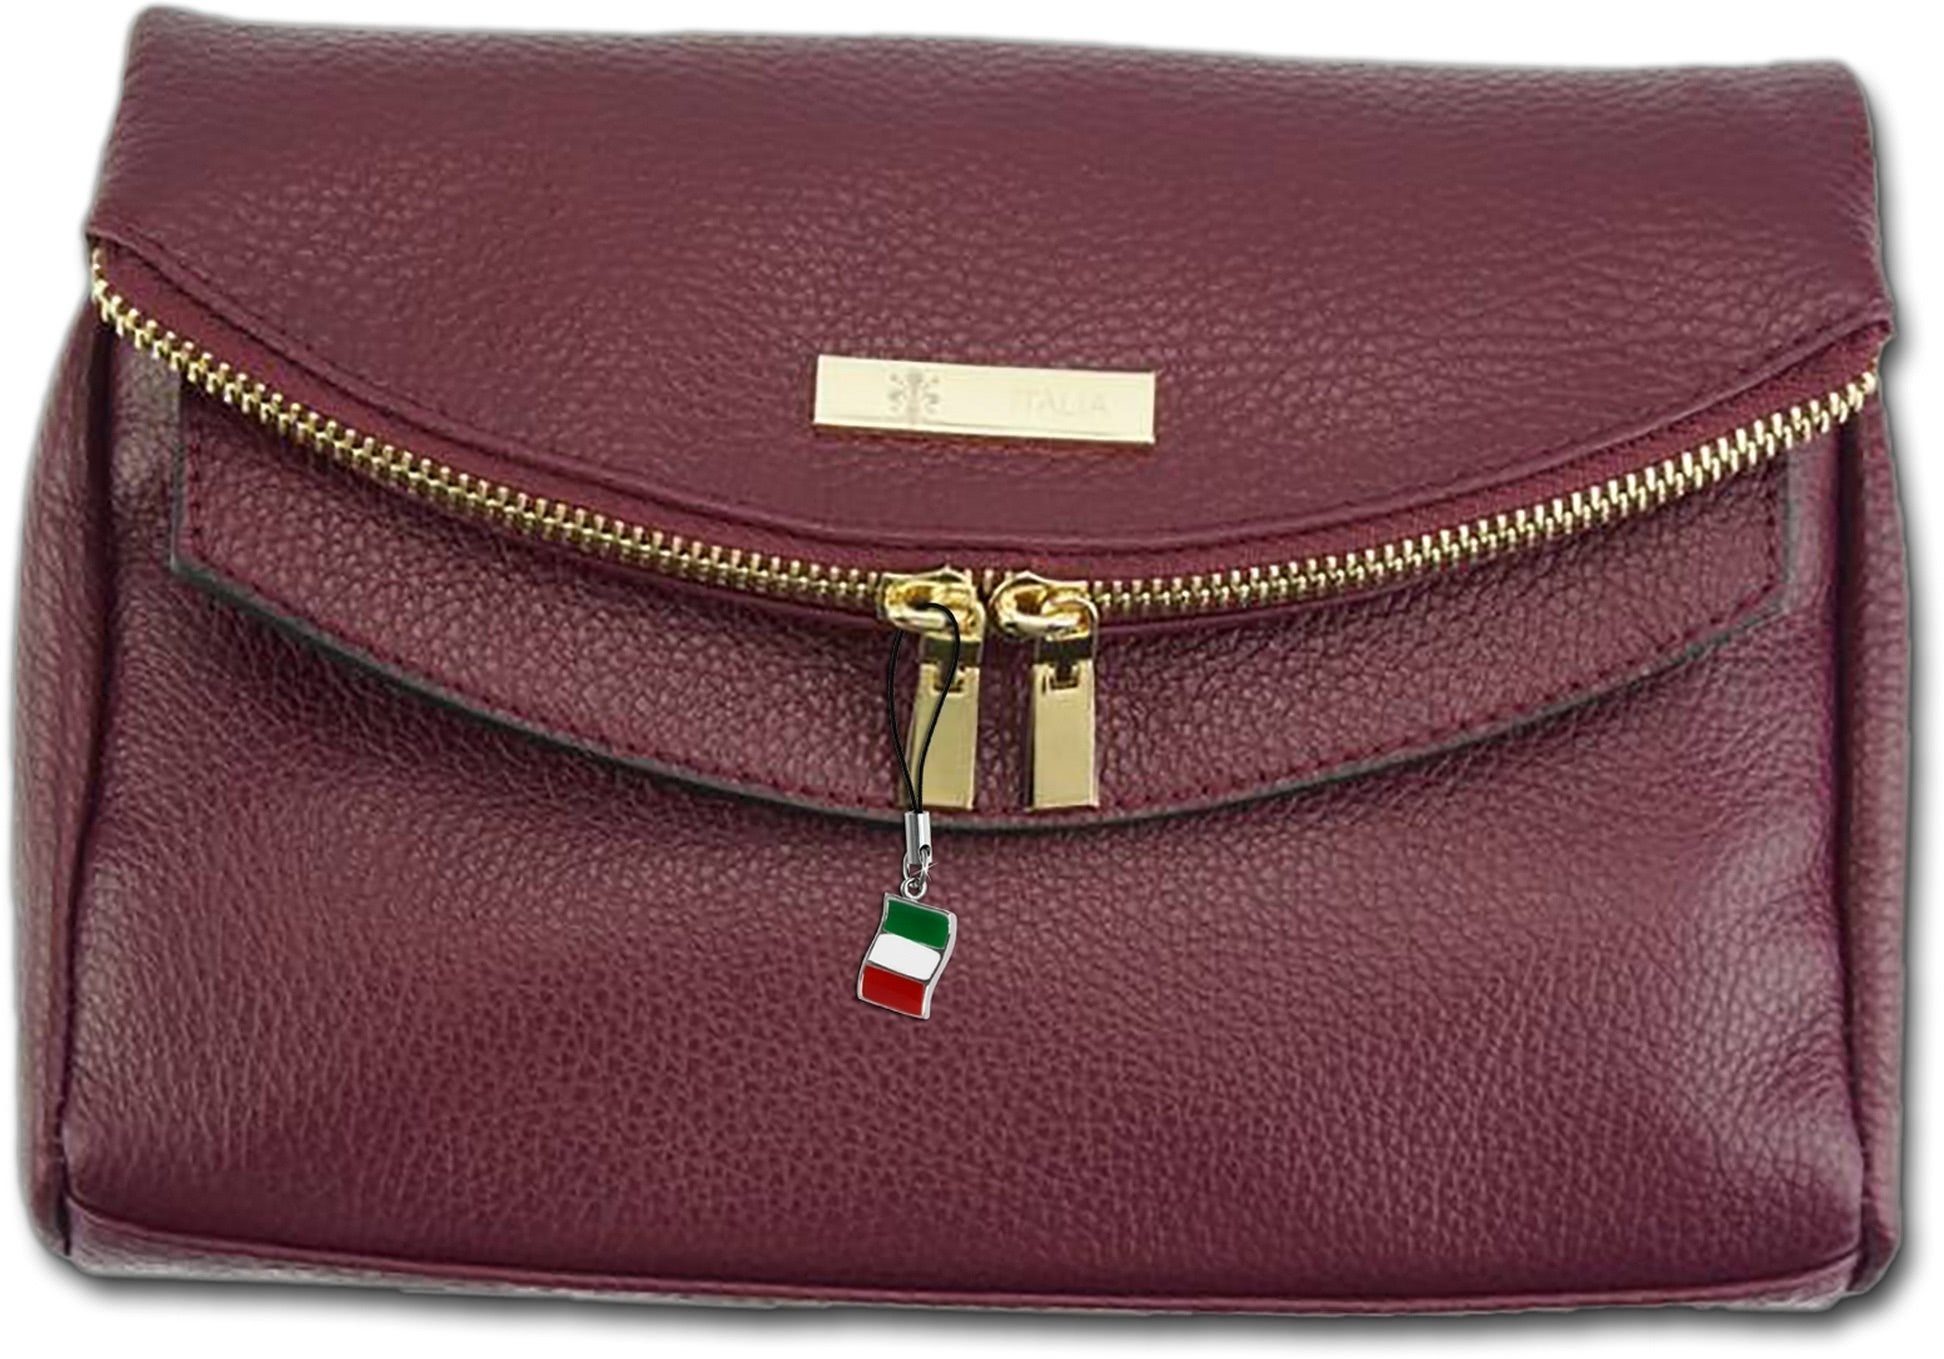 FLORENCE Clutch Florence 2in1 Echtleder Damentasche rot (Clutch, Clutch), Damen Tasche Echtleder rot, bordeaux, Made-In Italy